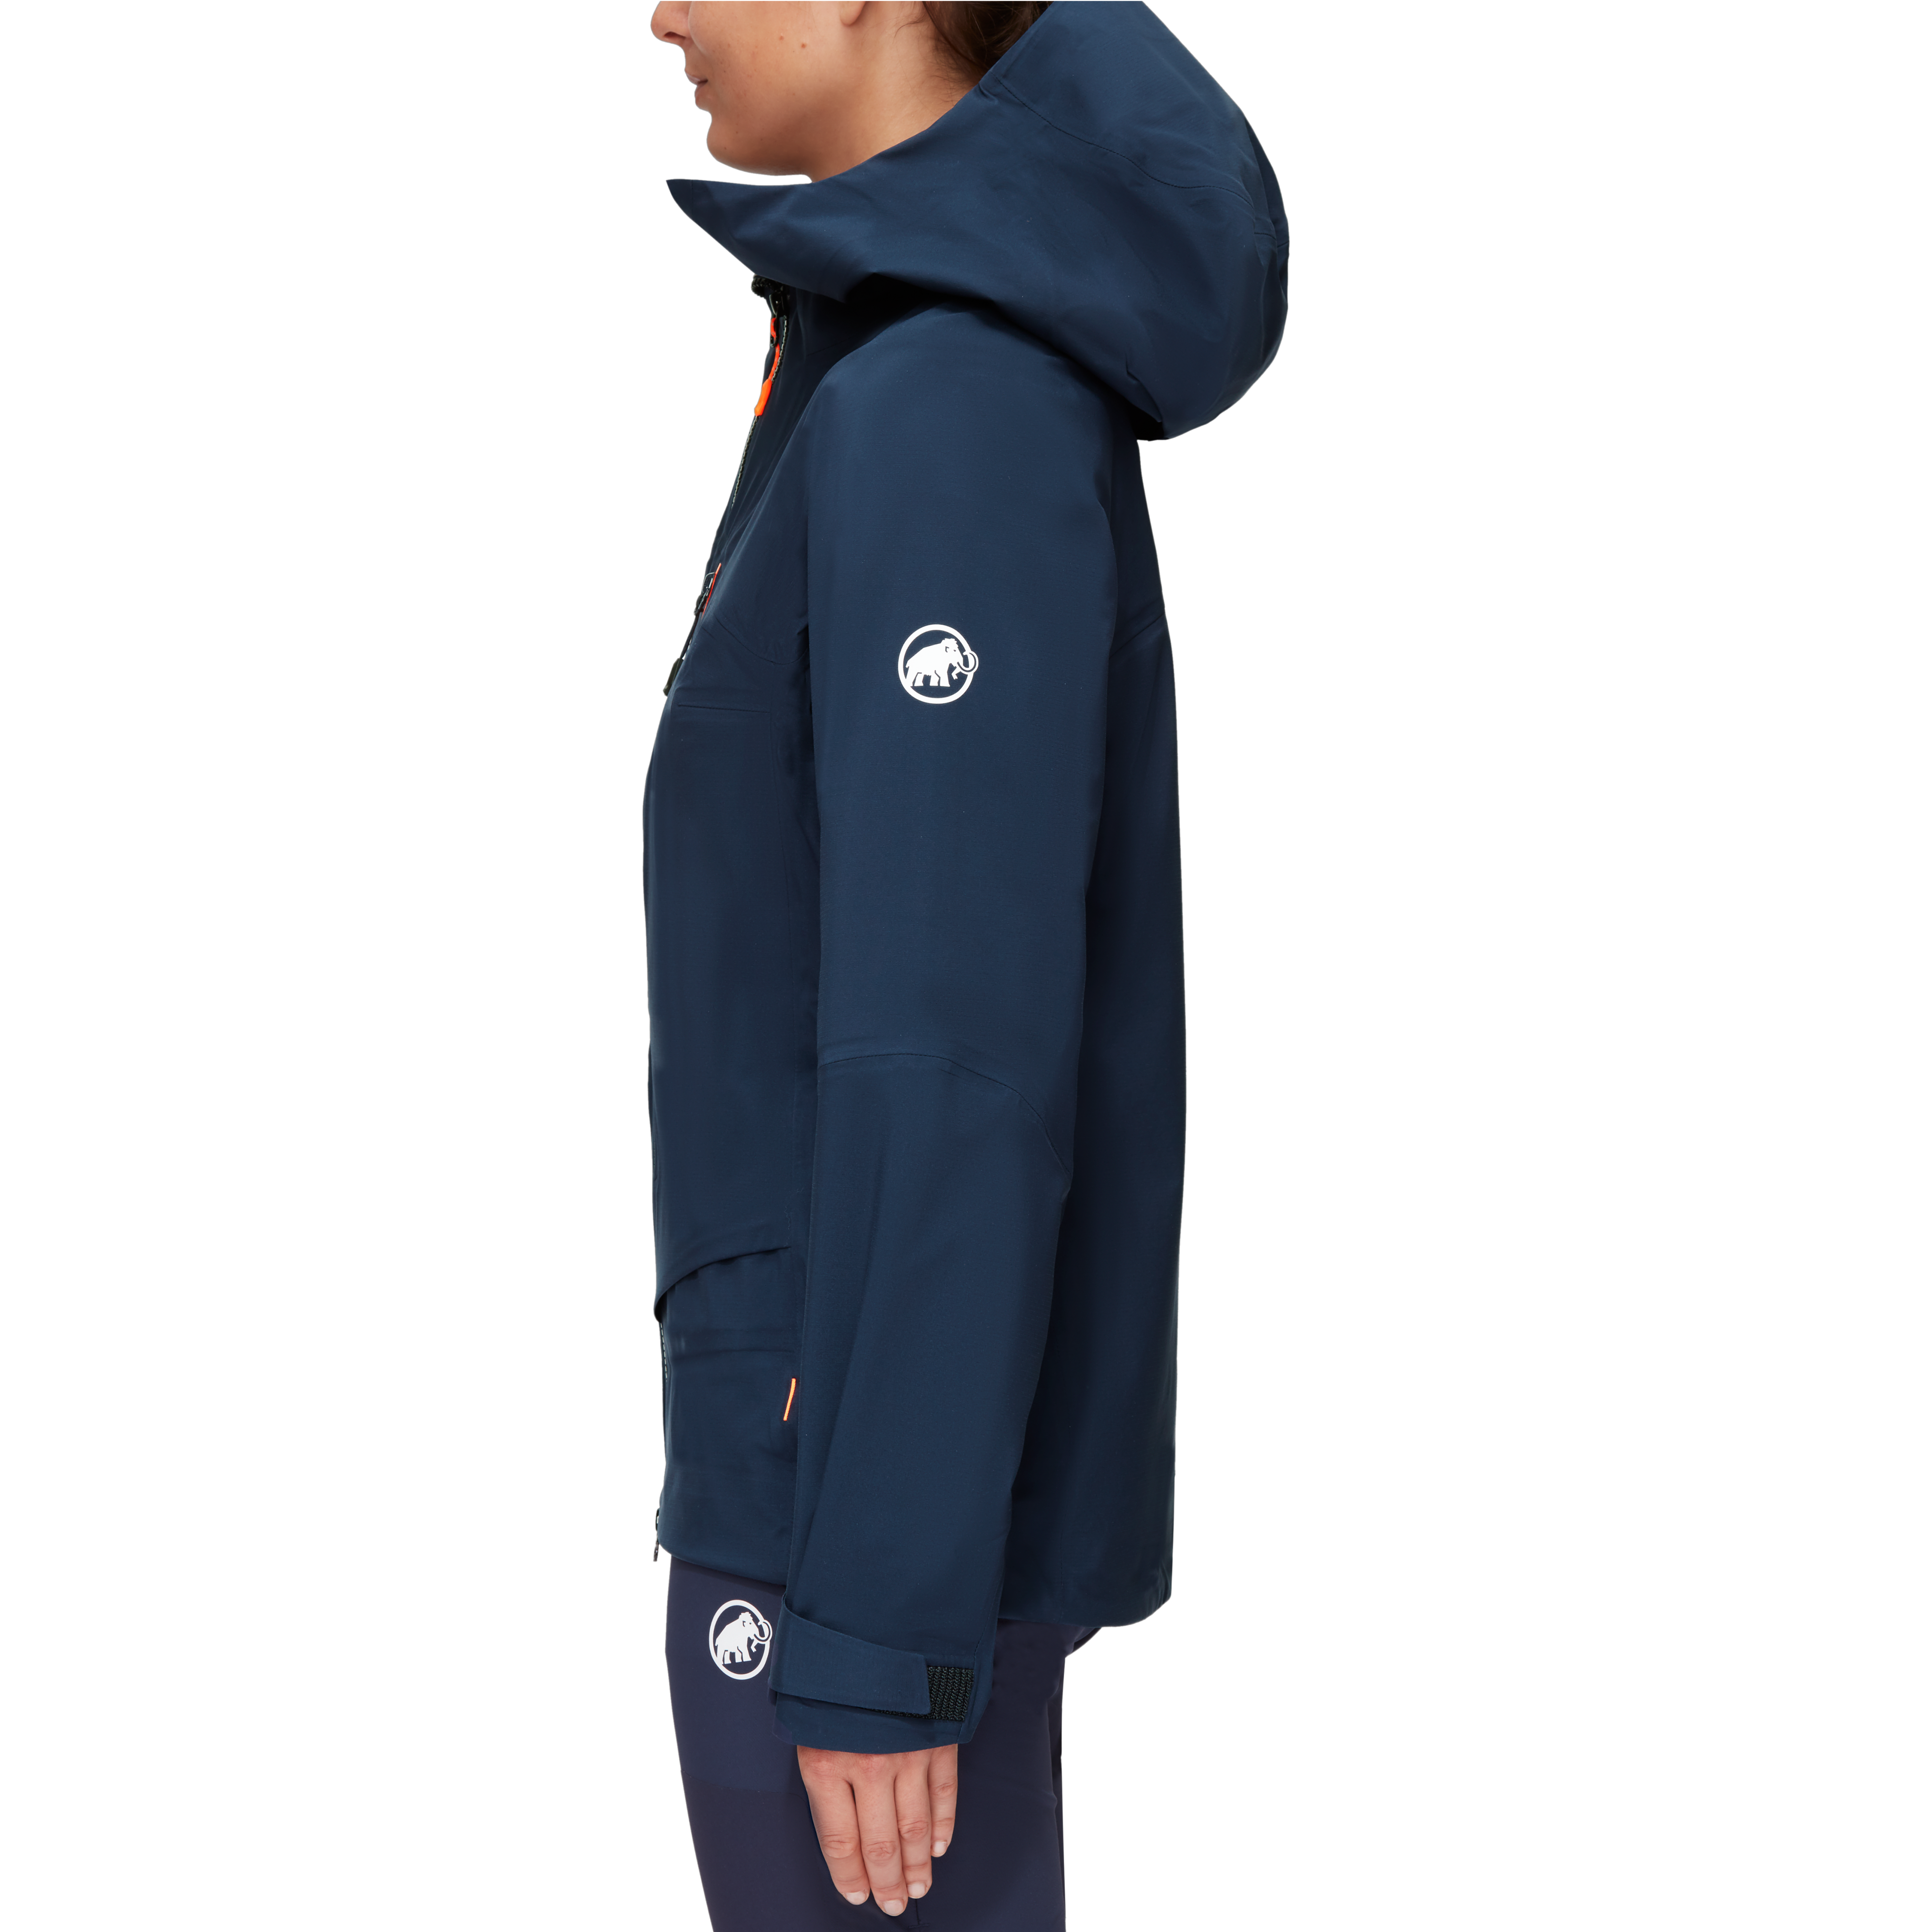 Aenergy Air HS Hooded Jacket Women product image